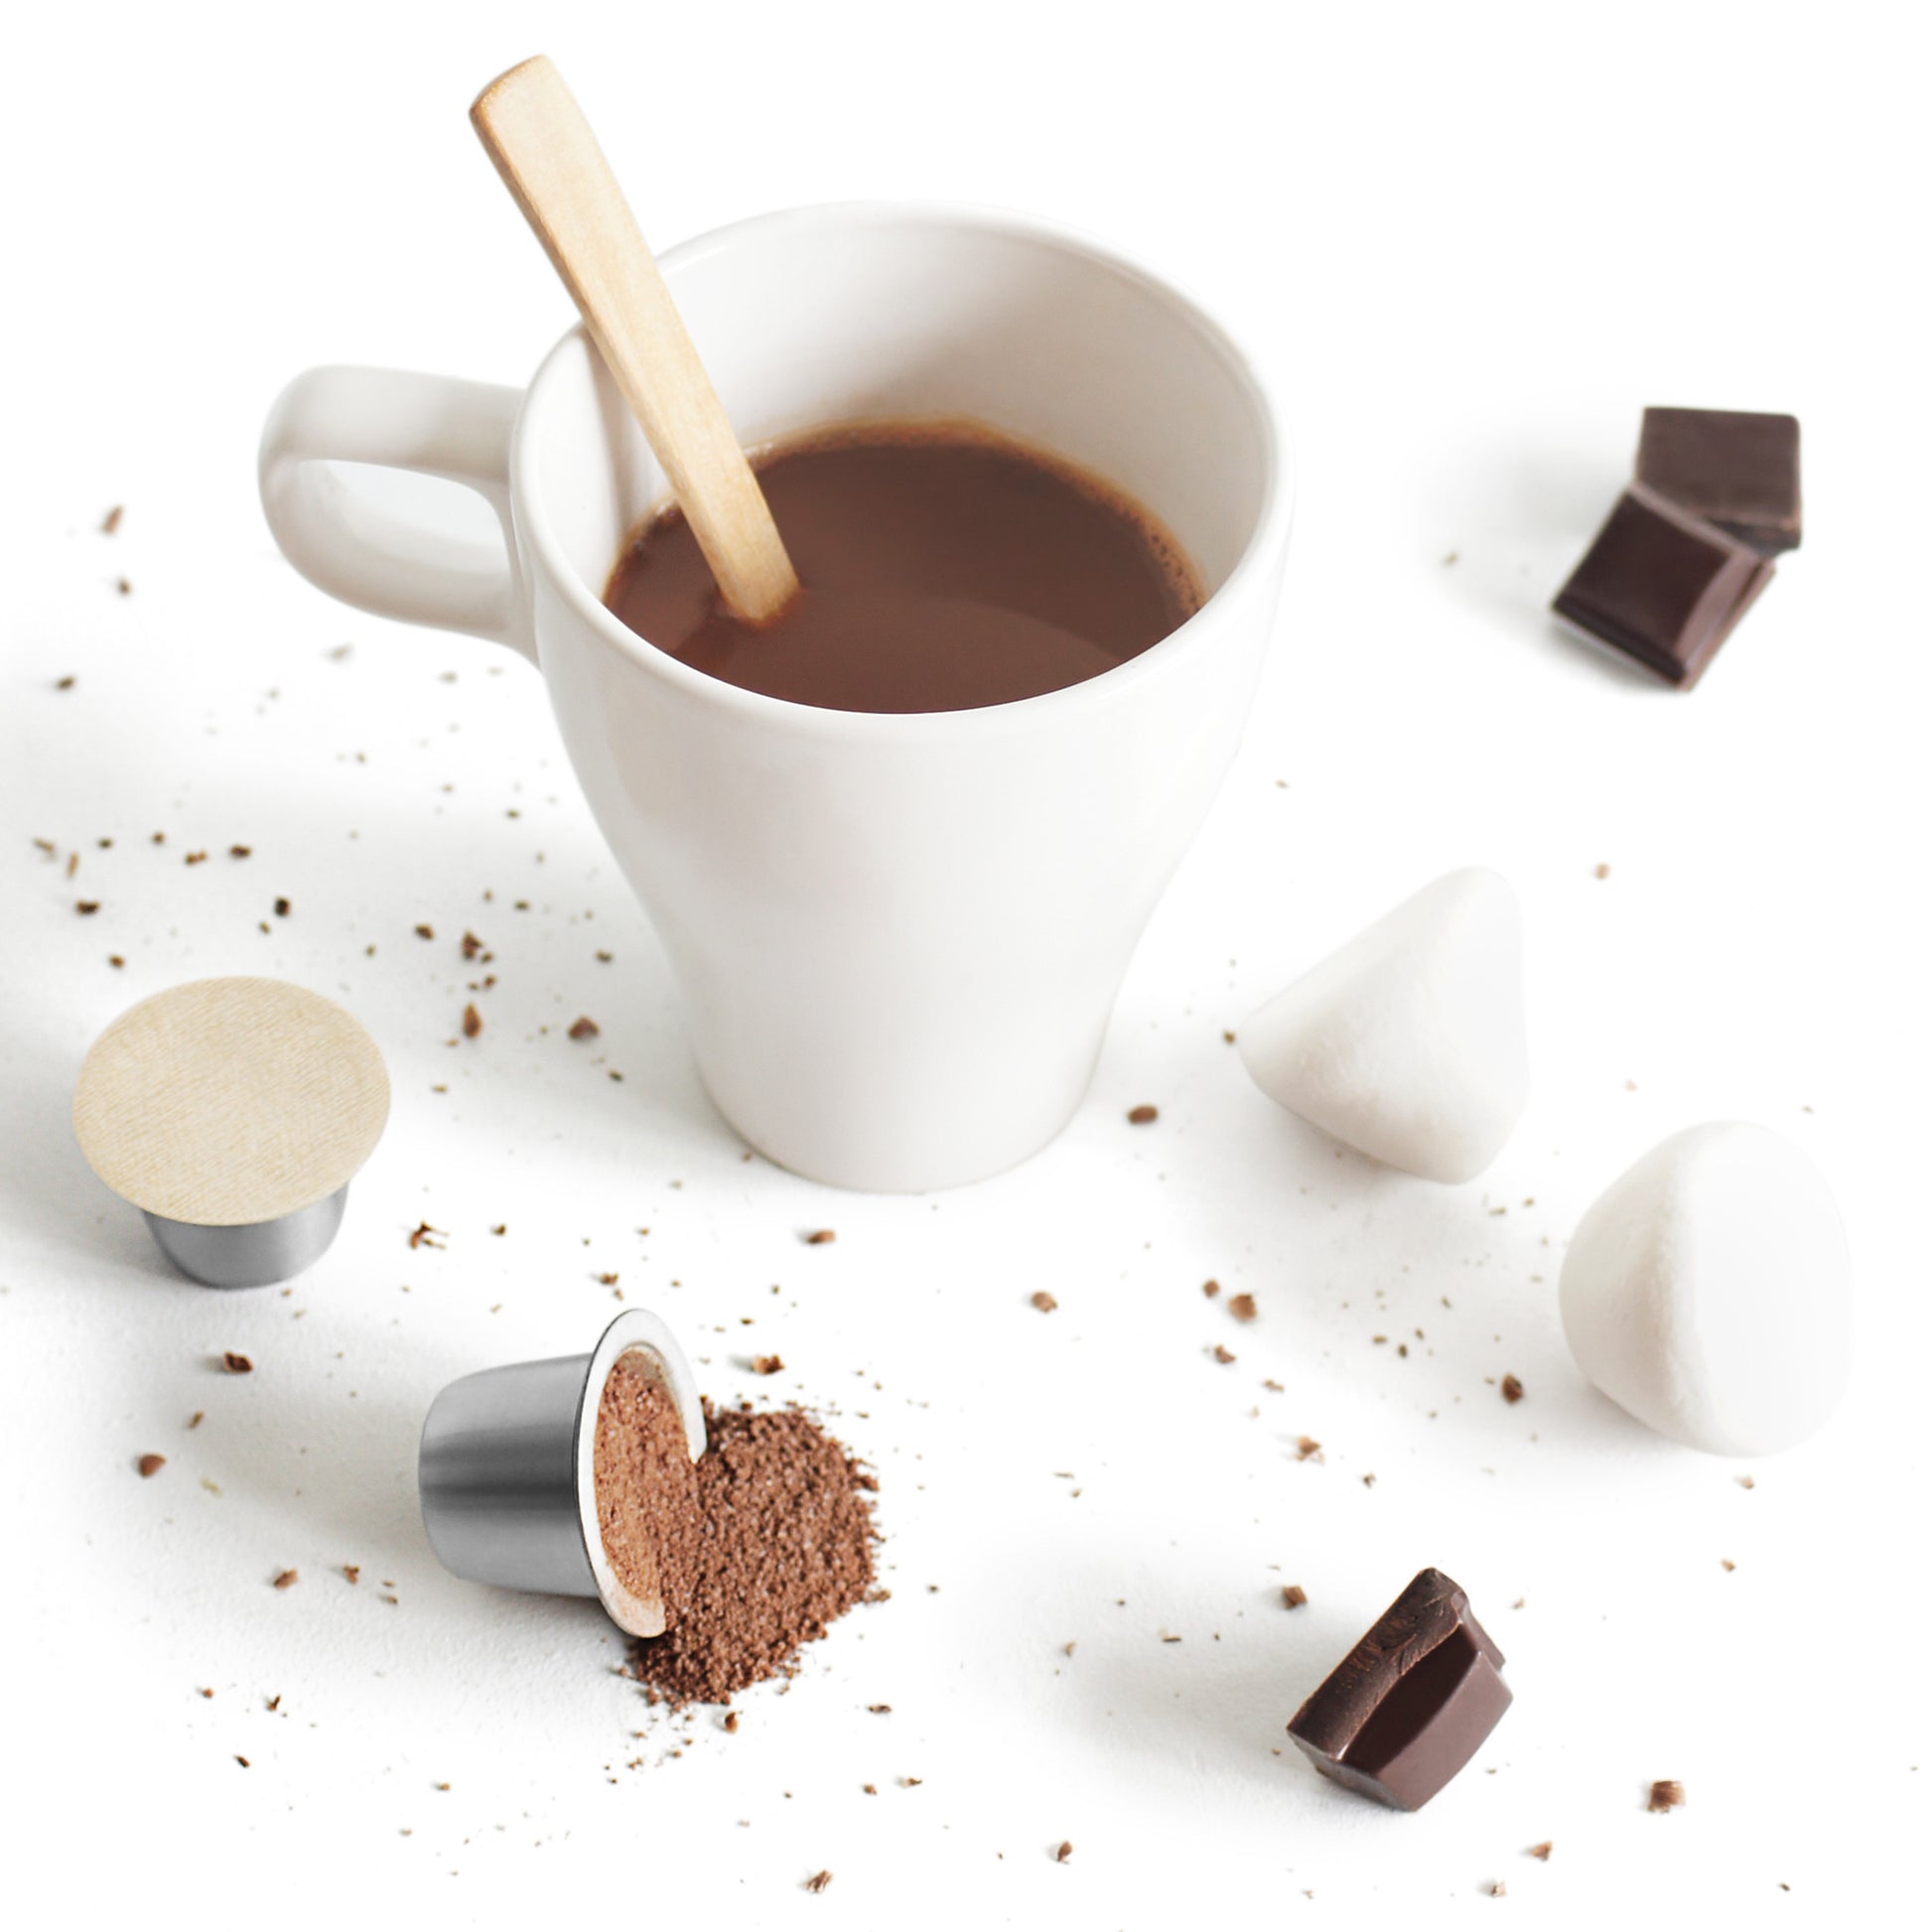 Make hot chocolate in a Nespresso Machine with these Sealpod Biodegradable Paper Lids and reusable coffee capsules